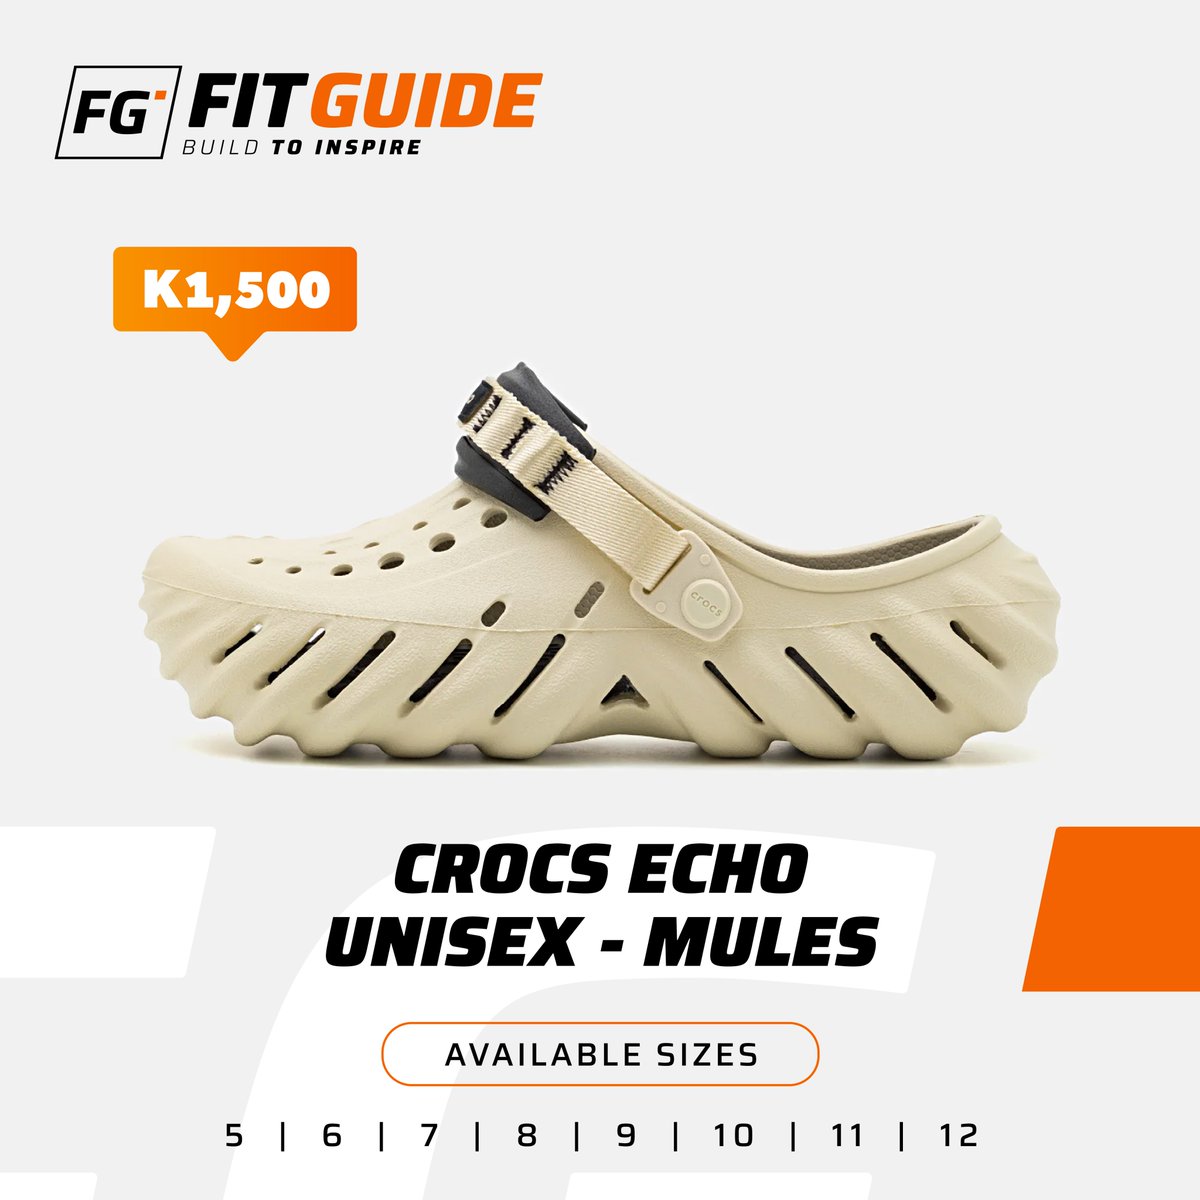 Tired of pinchy shoes? Slip into the Crocs Echo Unisex Mules for cloud-like cushioning! The tapered heel secures your foot for miles of comfort. Roomy toe box lets feet relax. Your feet will thank you!

#FitGuideZM
#CrocsComfort
#GoodbyePinchedFeet
#MadeForMiles
#FreeYourToes